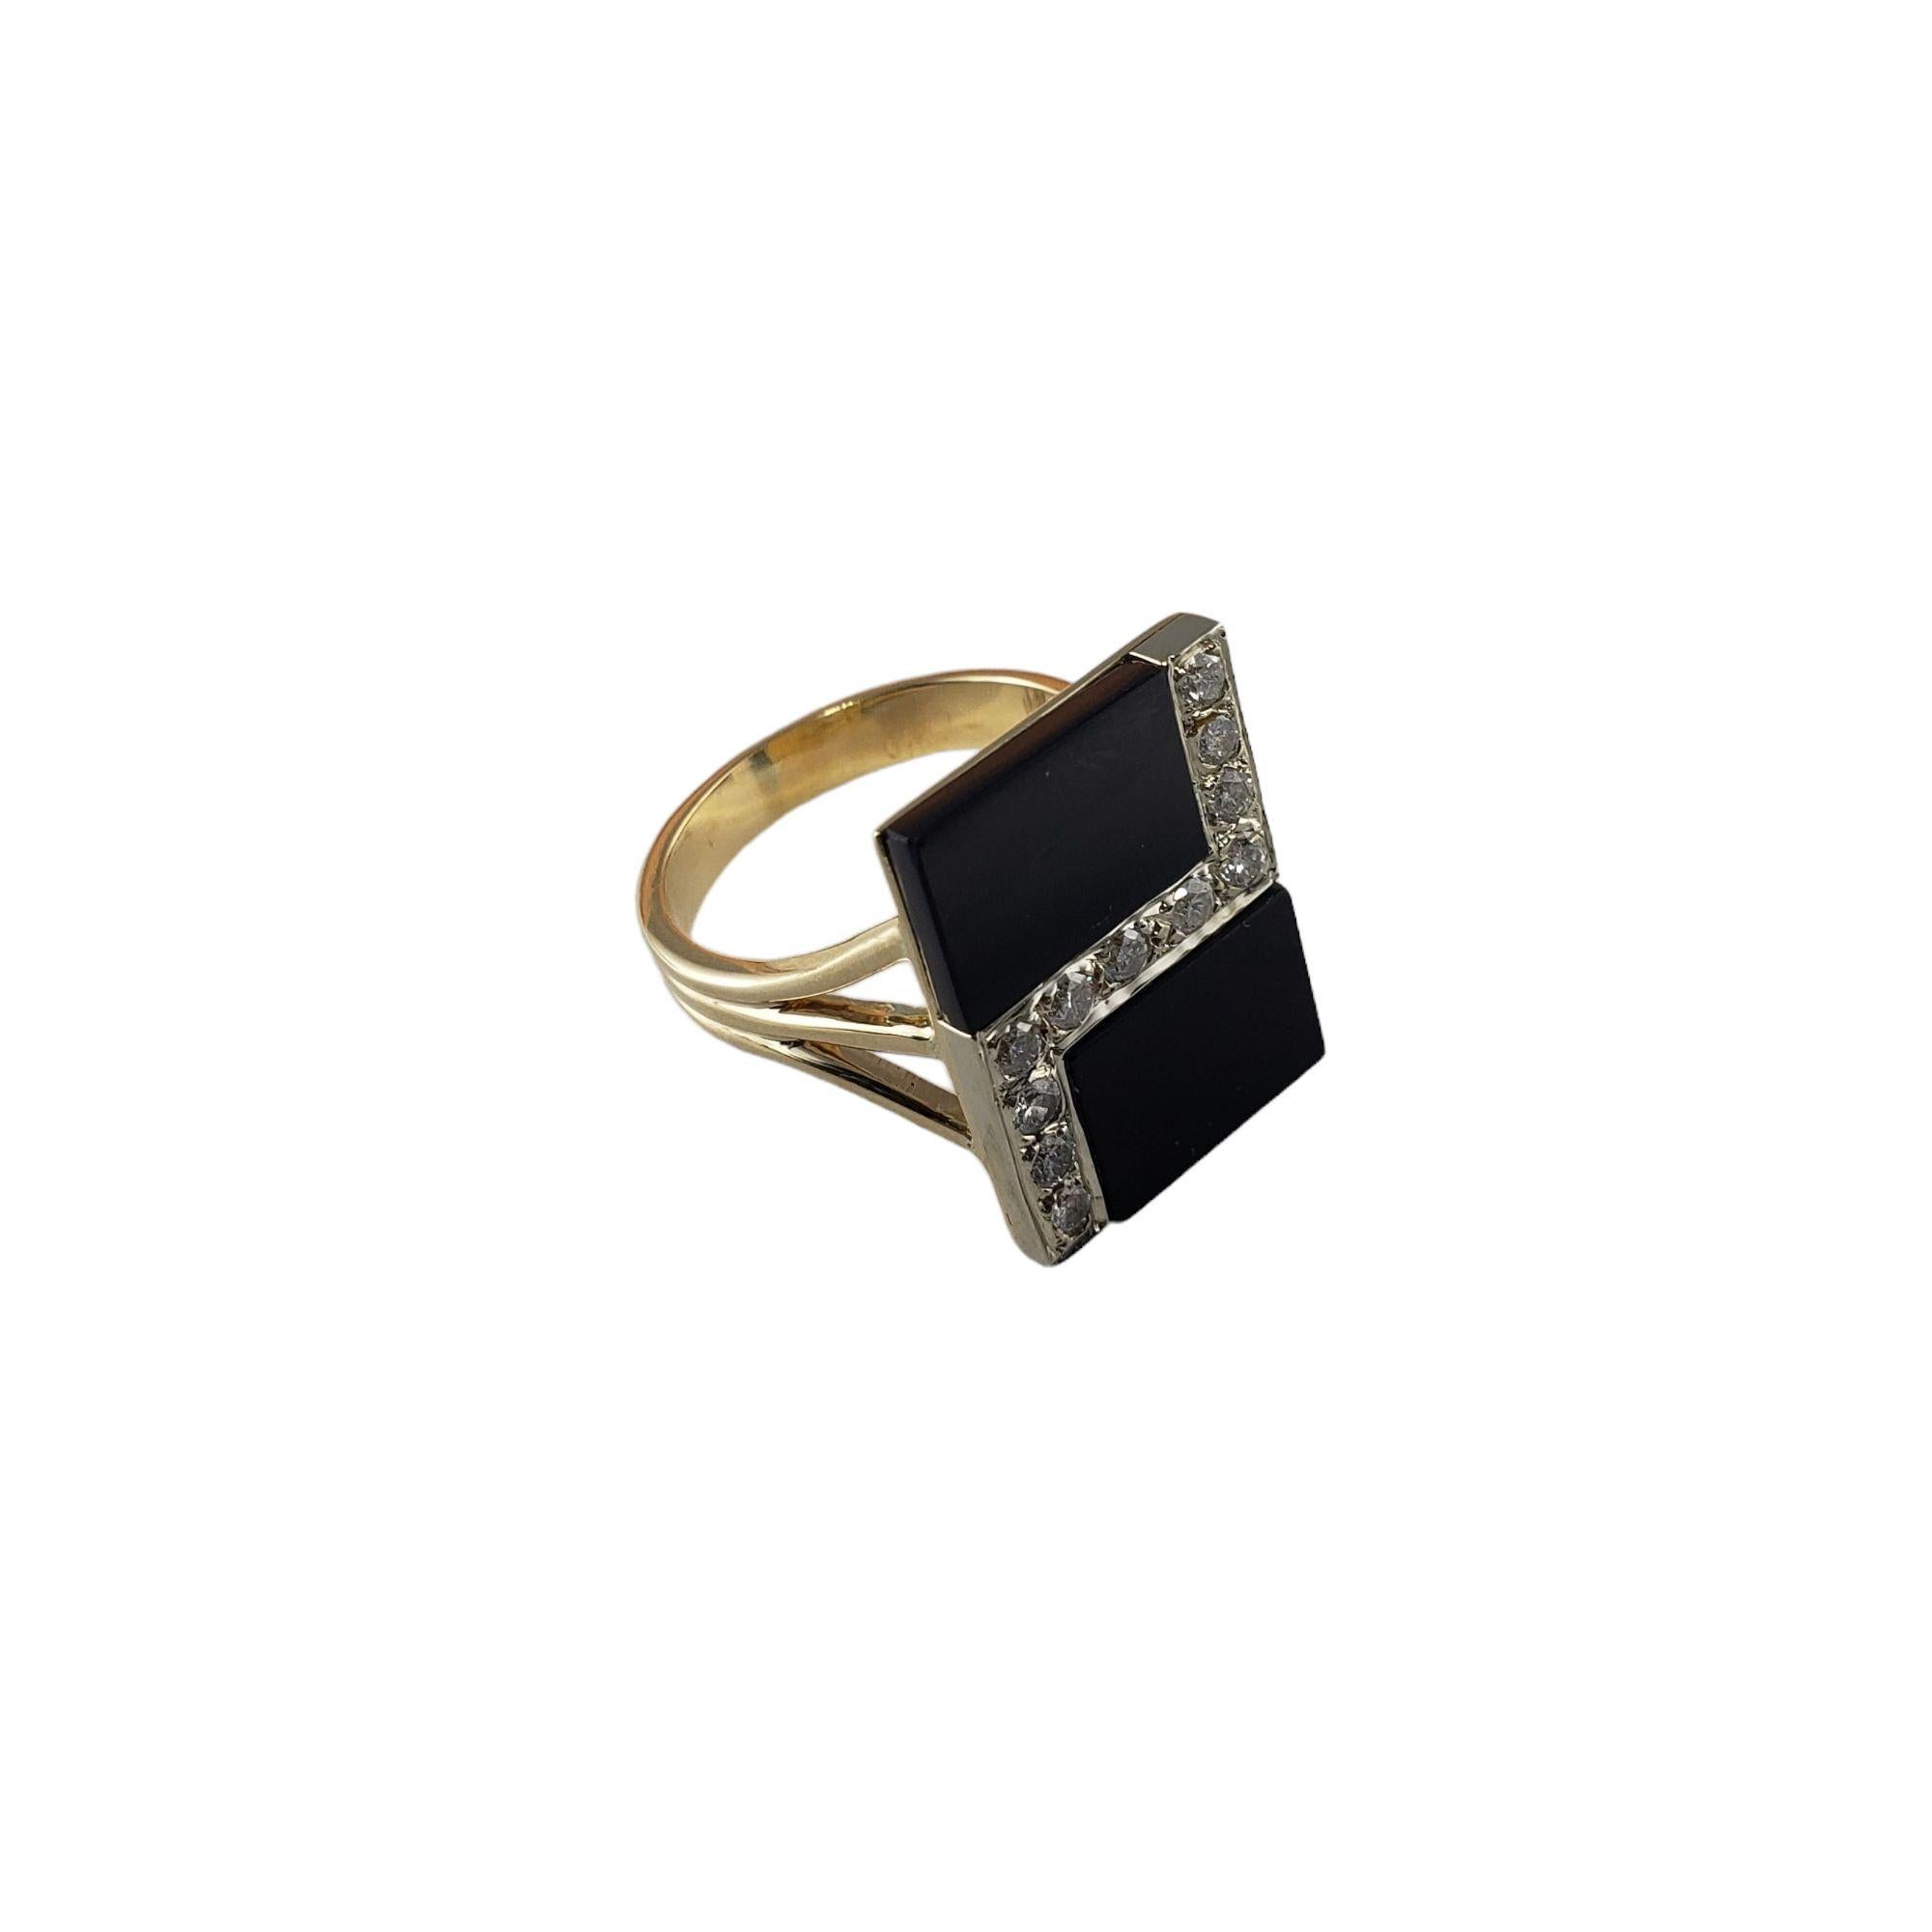 Vintage 14 Karat Yellow Gold Onyx and Diamond Ring Size 7.25-

This elegant stunning ring features black onyx and 11 round brilliant cut diamonds set in classic 14K yellow gold. Top of ring measures 19 mm x 15 mm. Shank: 4 mm.

Approximate total